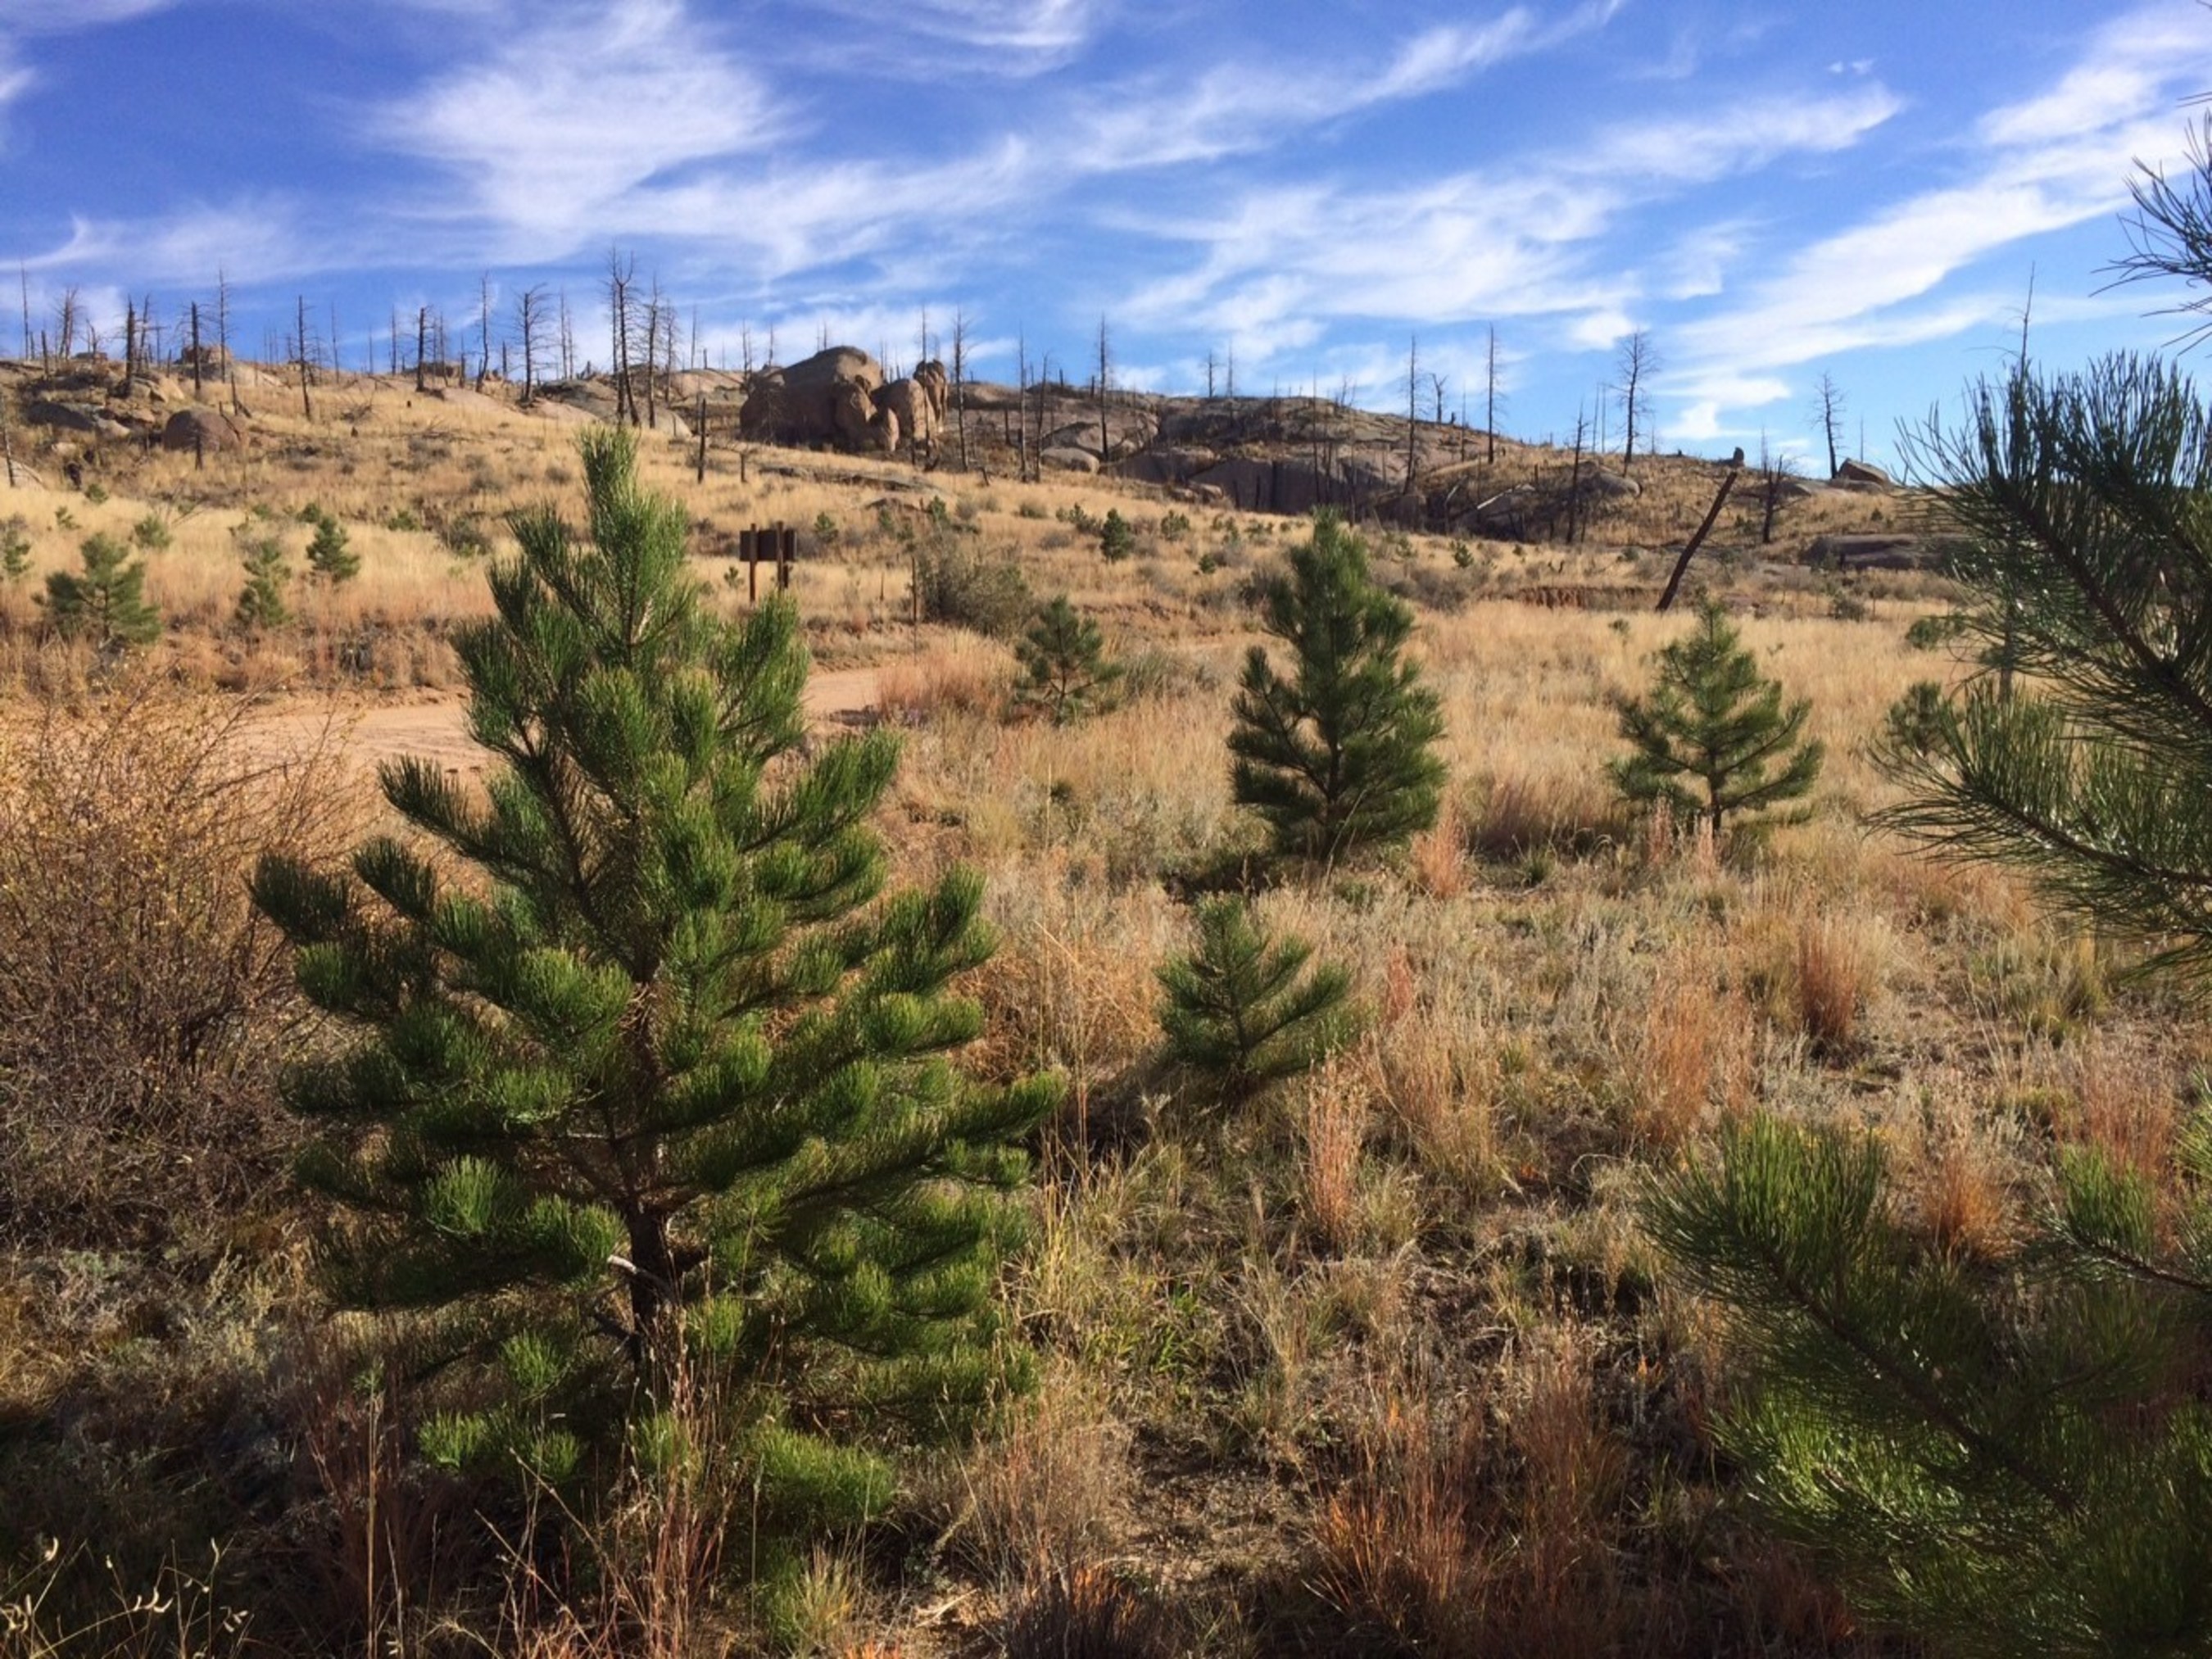 During the last decade, the Enterprise 50 Million Tree Pledge has supported more than 80 reforestation projects and planted more than 50 different species of trees across 15 states. Pictured is an example of a ten-year-old tree from Pike National Forest.